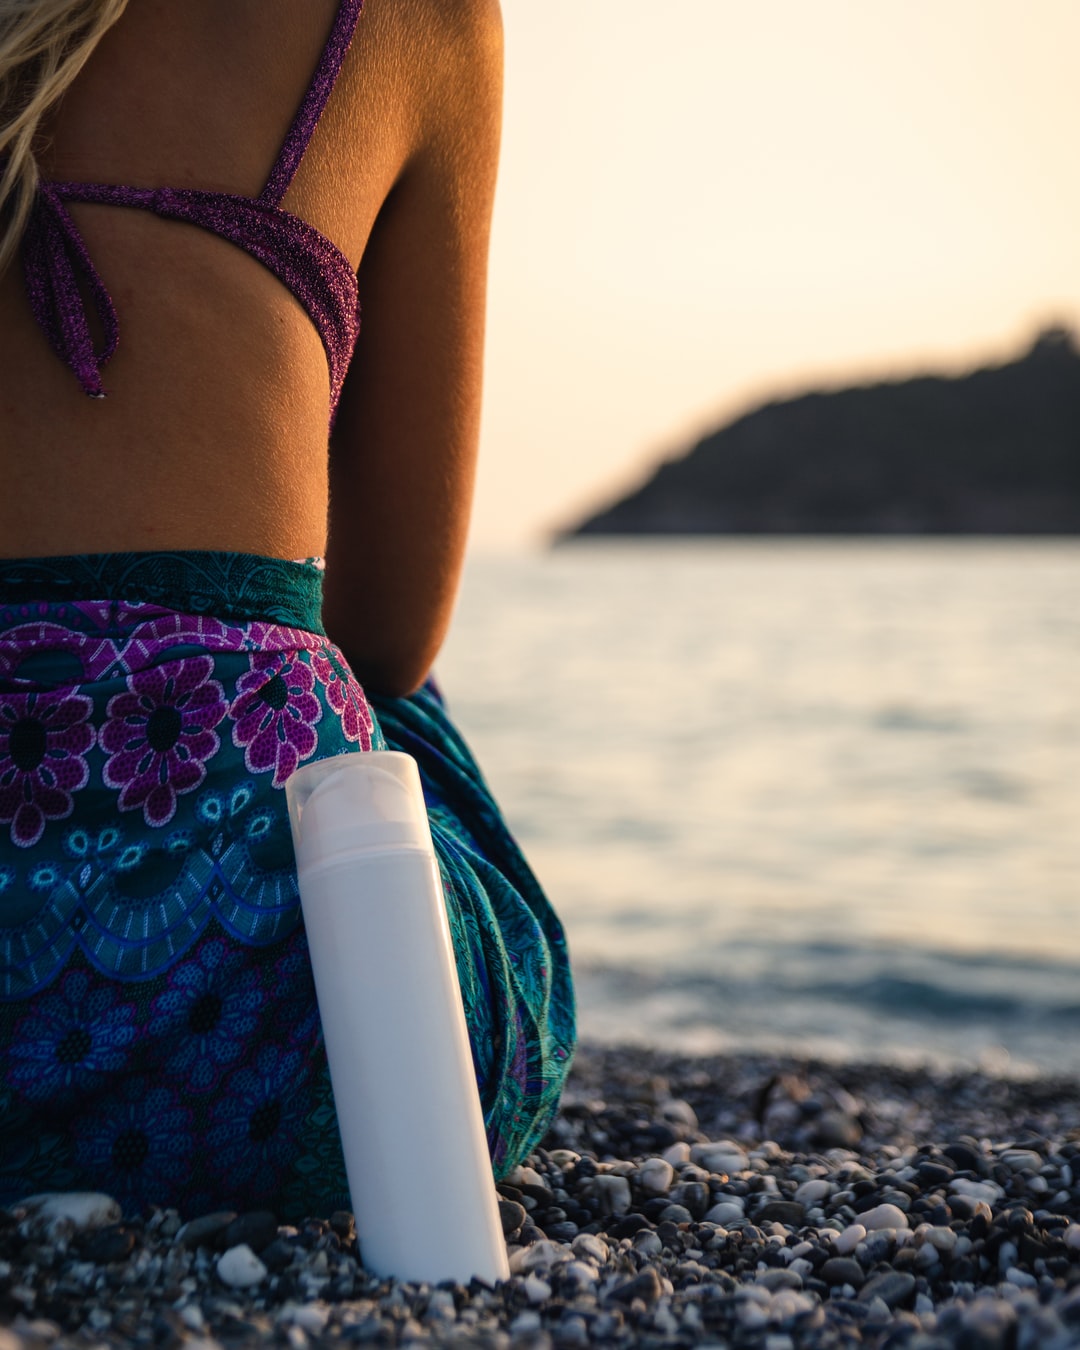 Chemical vs. Physical Sunscreen: All You Need to Know